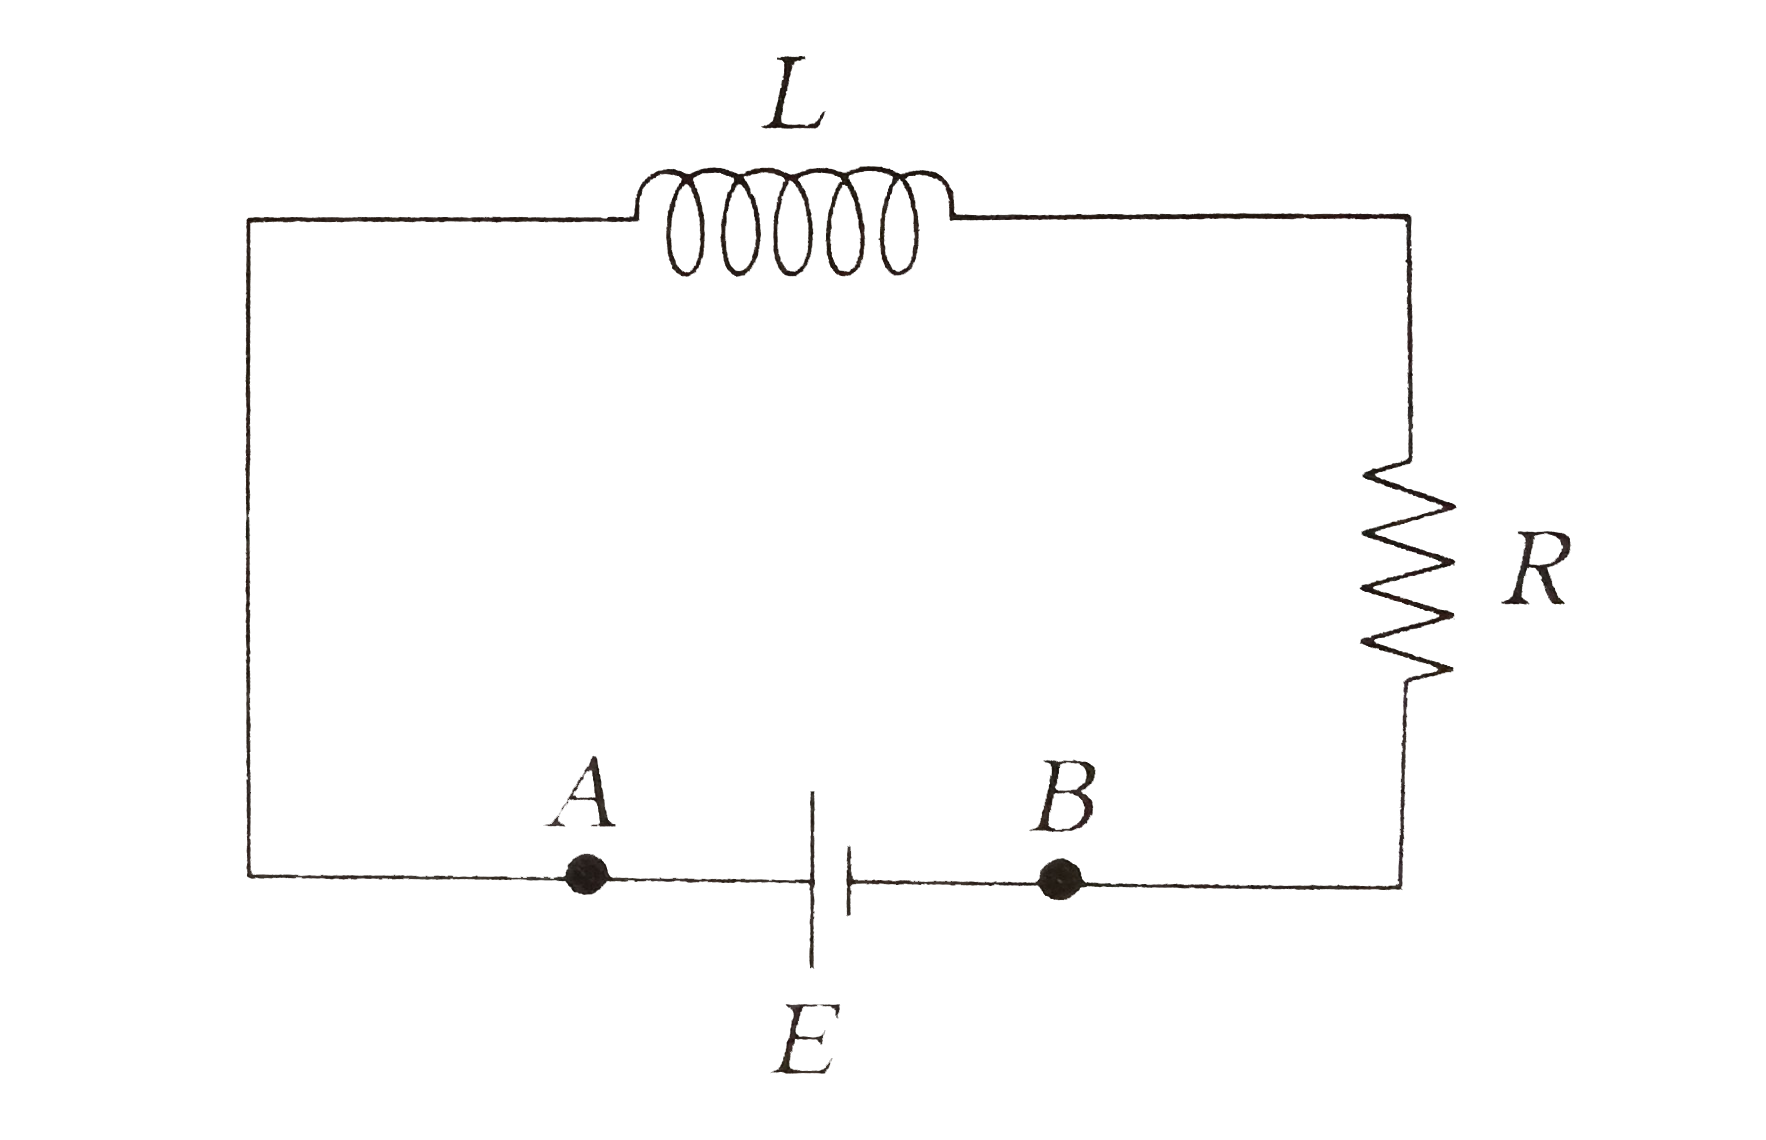 An inductor (L = 100 mH), a resistor (R = 100Omega) and a battery (E = 100V) are initially connected in series as shown in the figure. After a long time, the battery is disconnected after short-circuiting the points A and B. The current in the circuit 1 ms after the short-circuit is